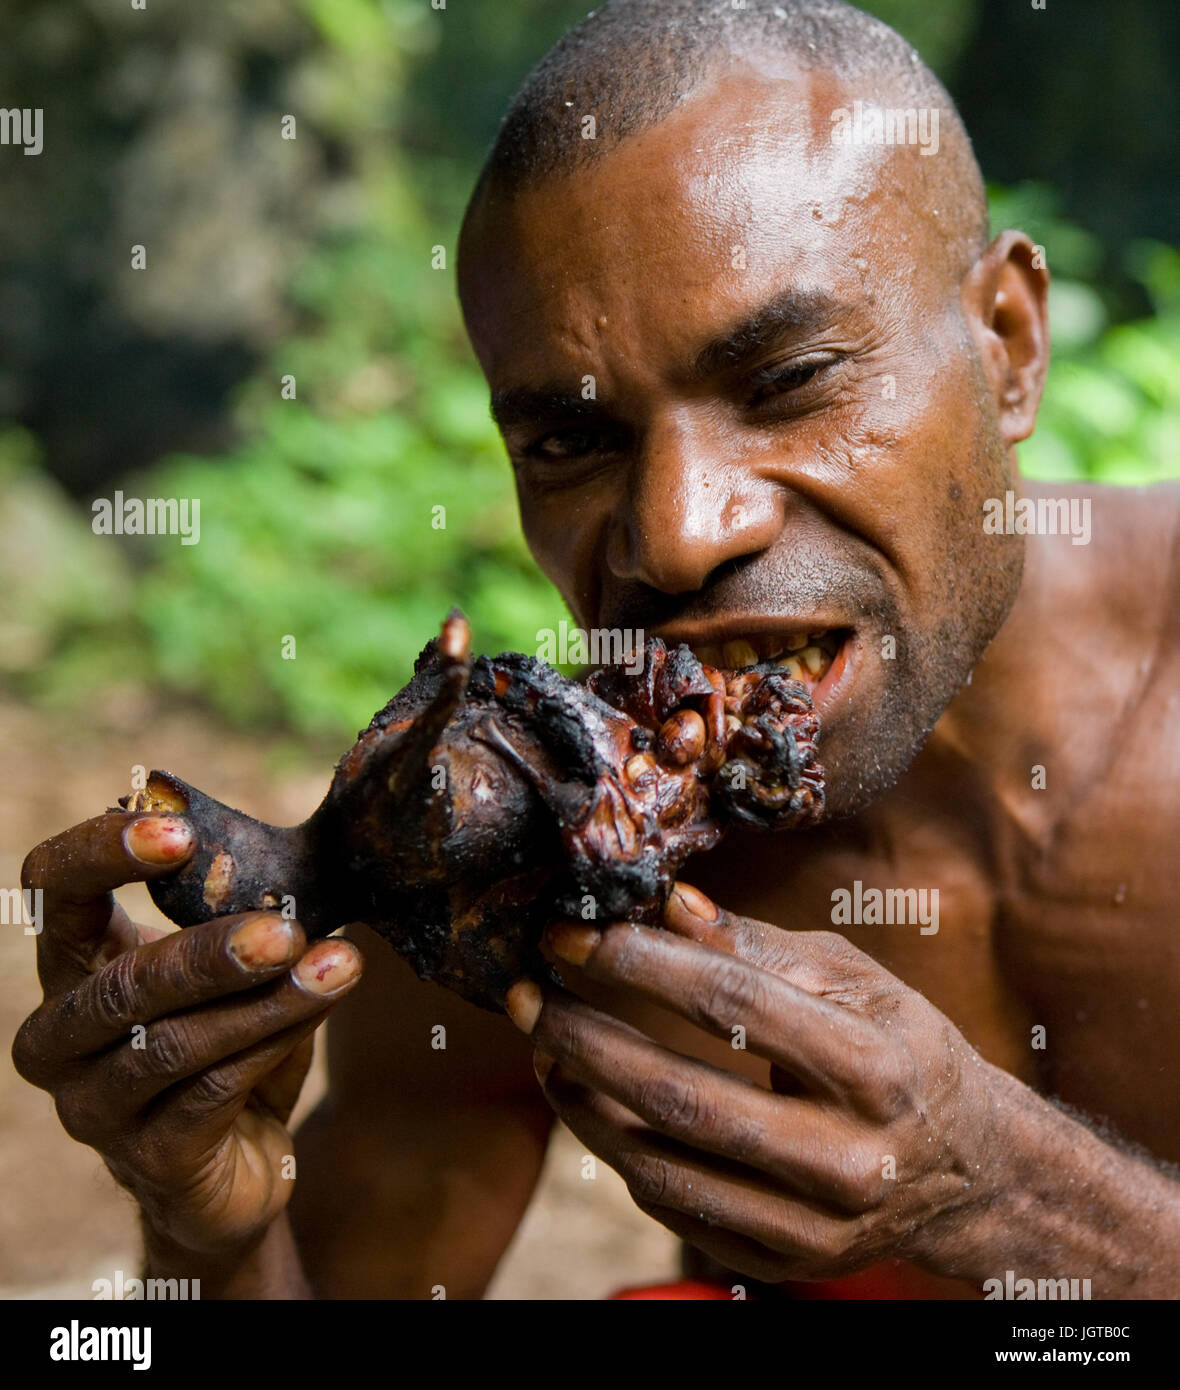 NEW GUINEA, INDONESIA - 13 JANUARY: Man tribe Yaffi eating a piece of meat. Stock Photo